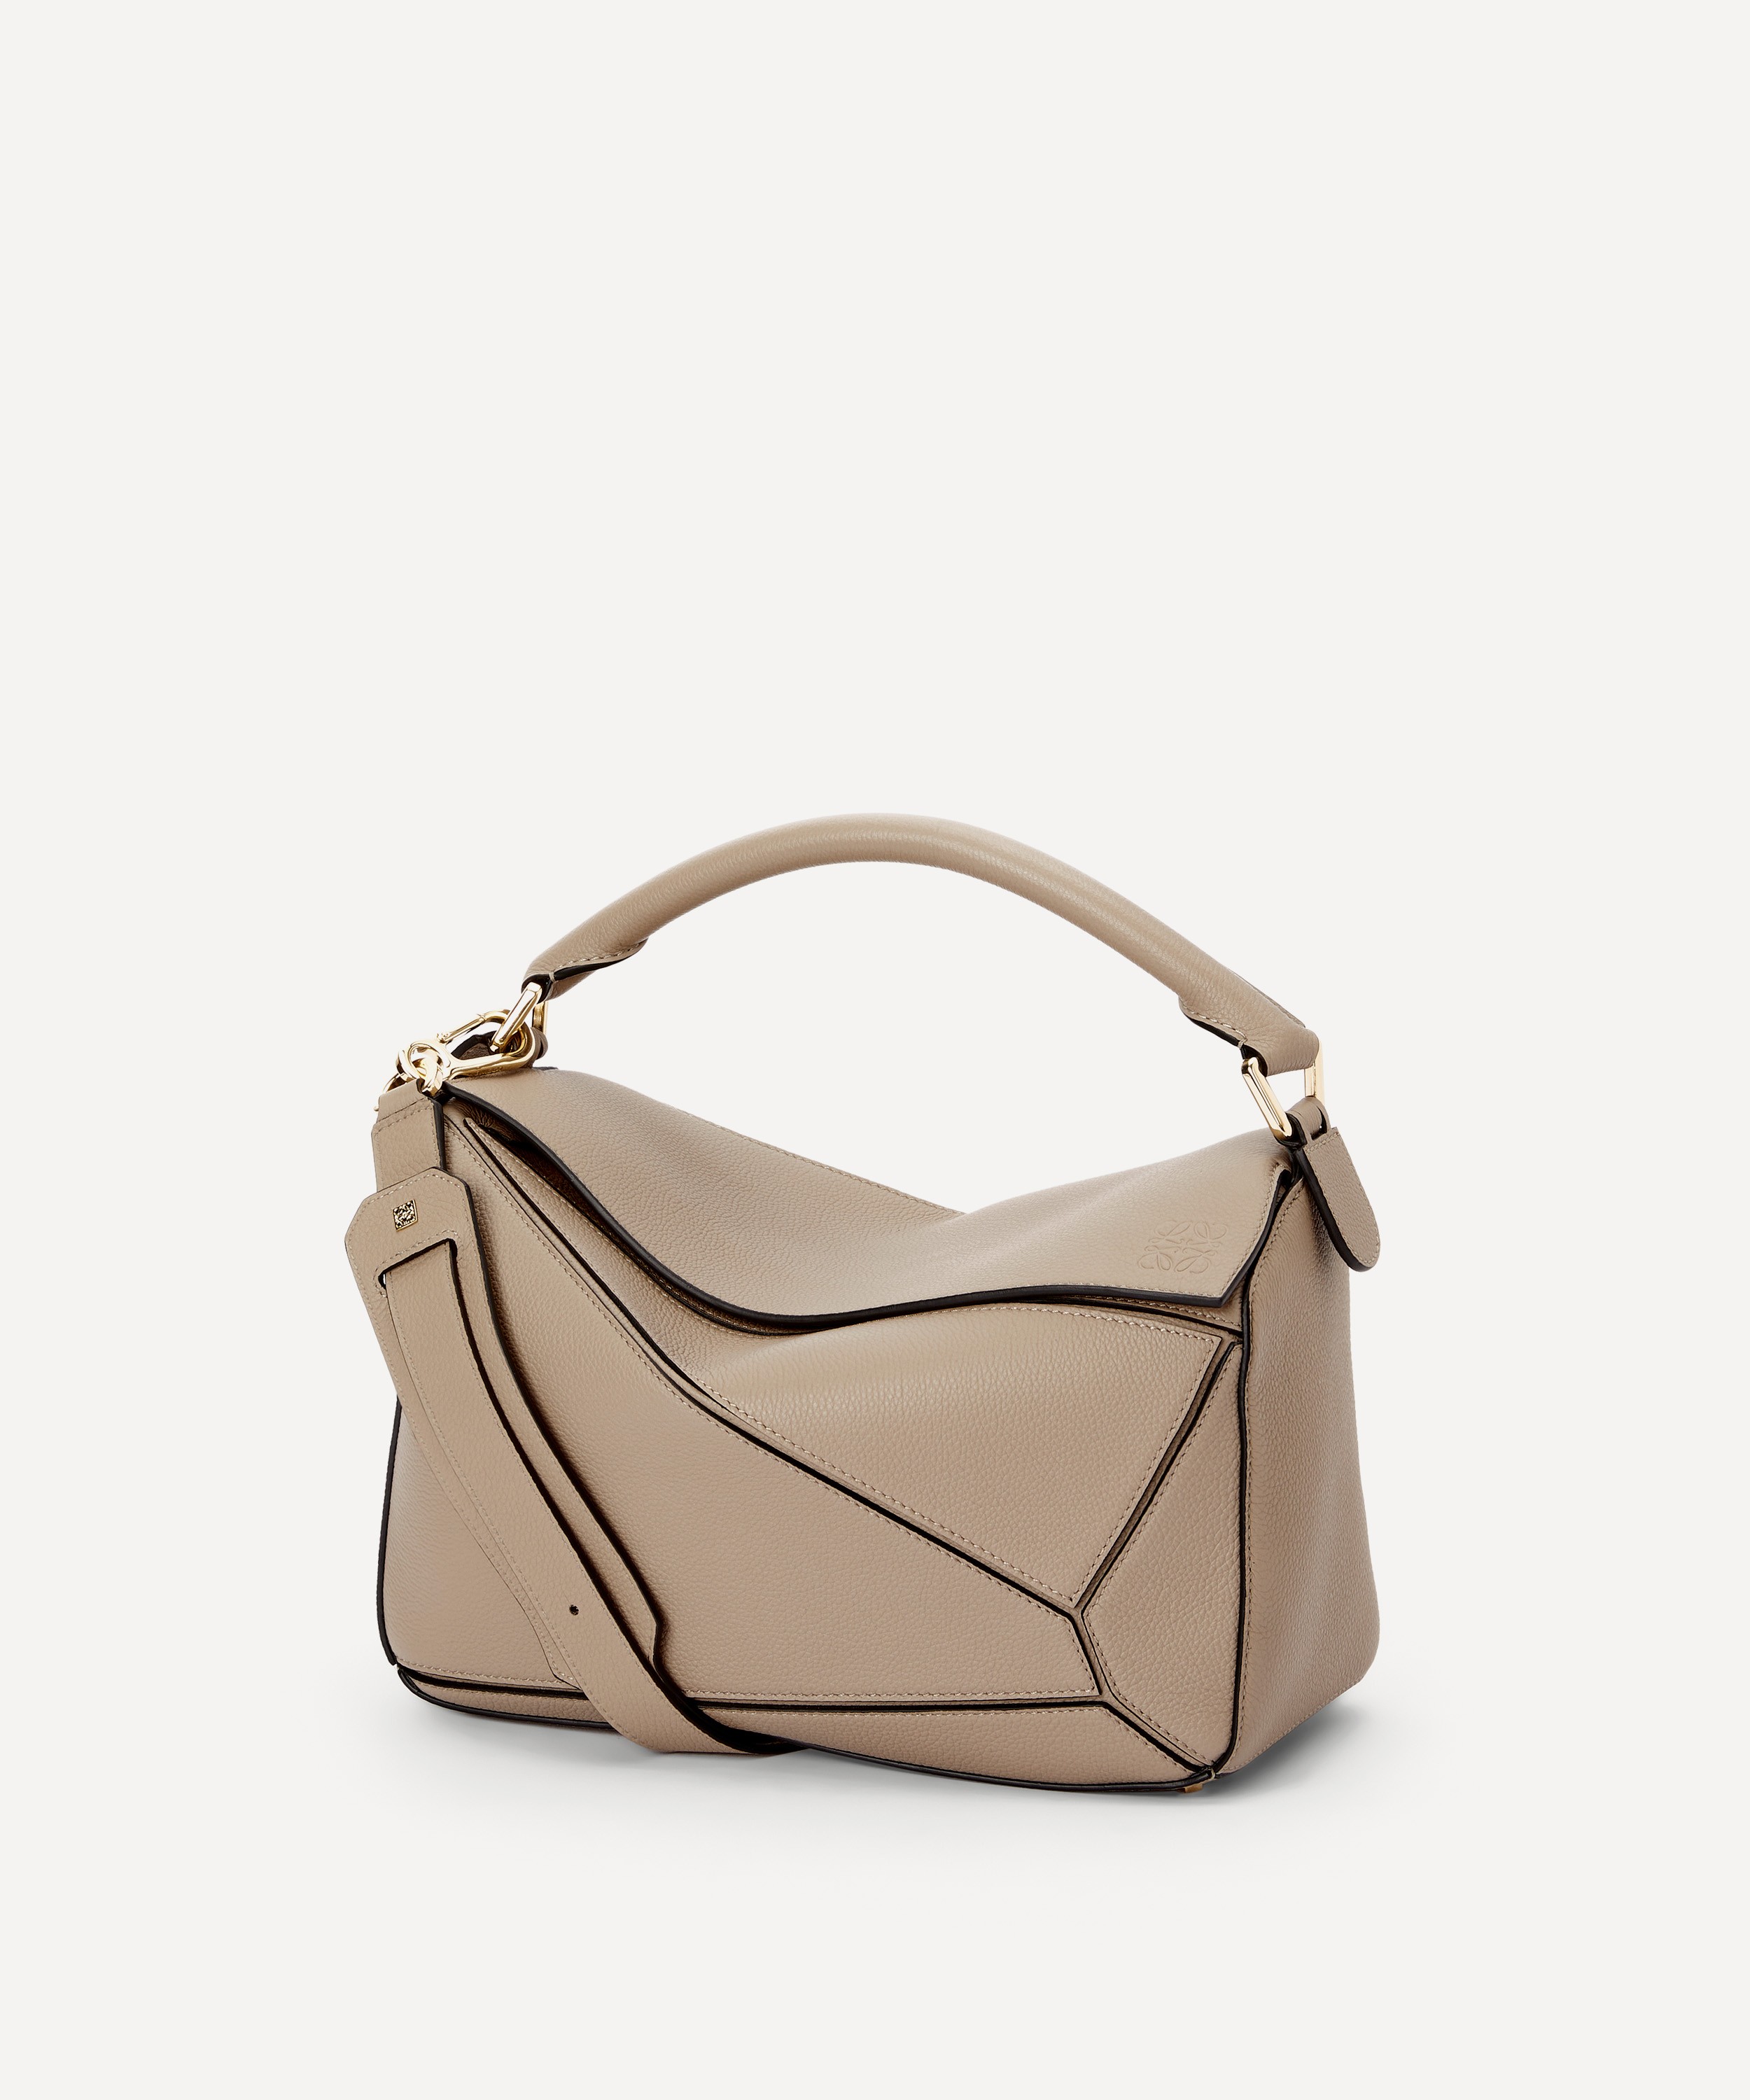 How the Loewe Puzzle Bag Became a Modern-Day Classic